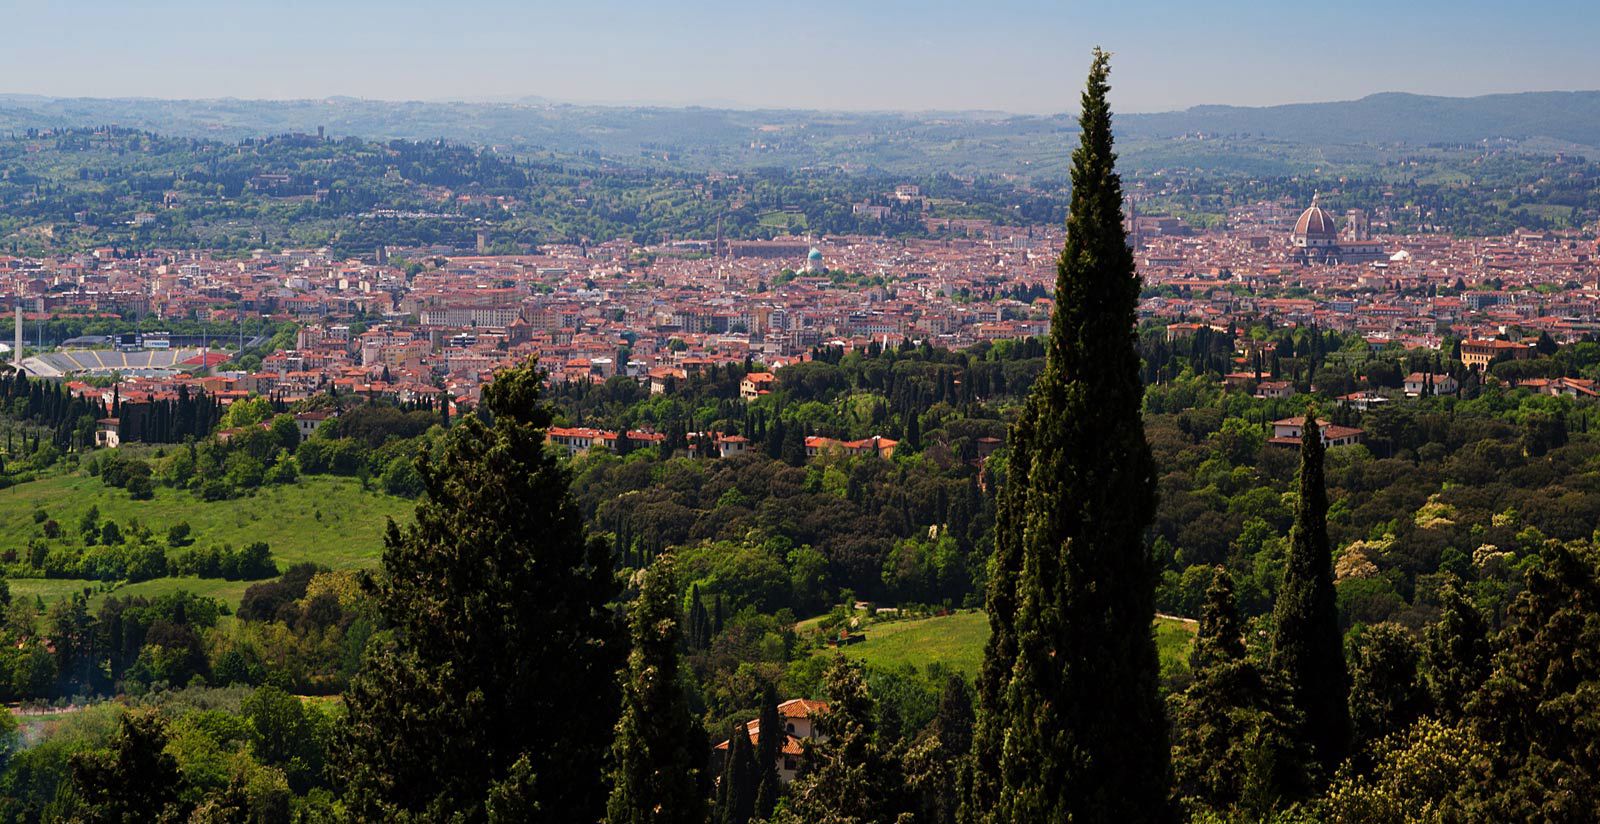 Hotel Villa Fiesole in Tuscany | Official Site (fhhotelgroup.it)